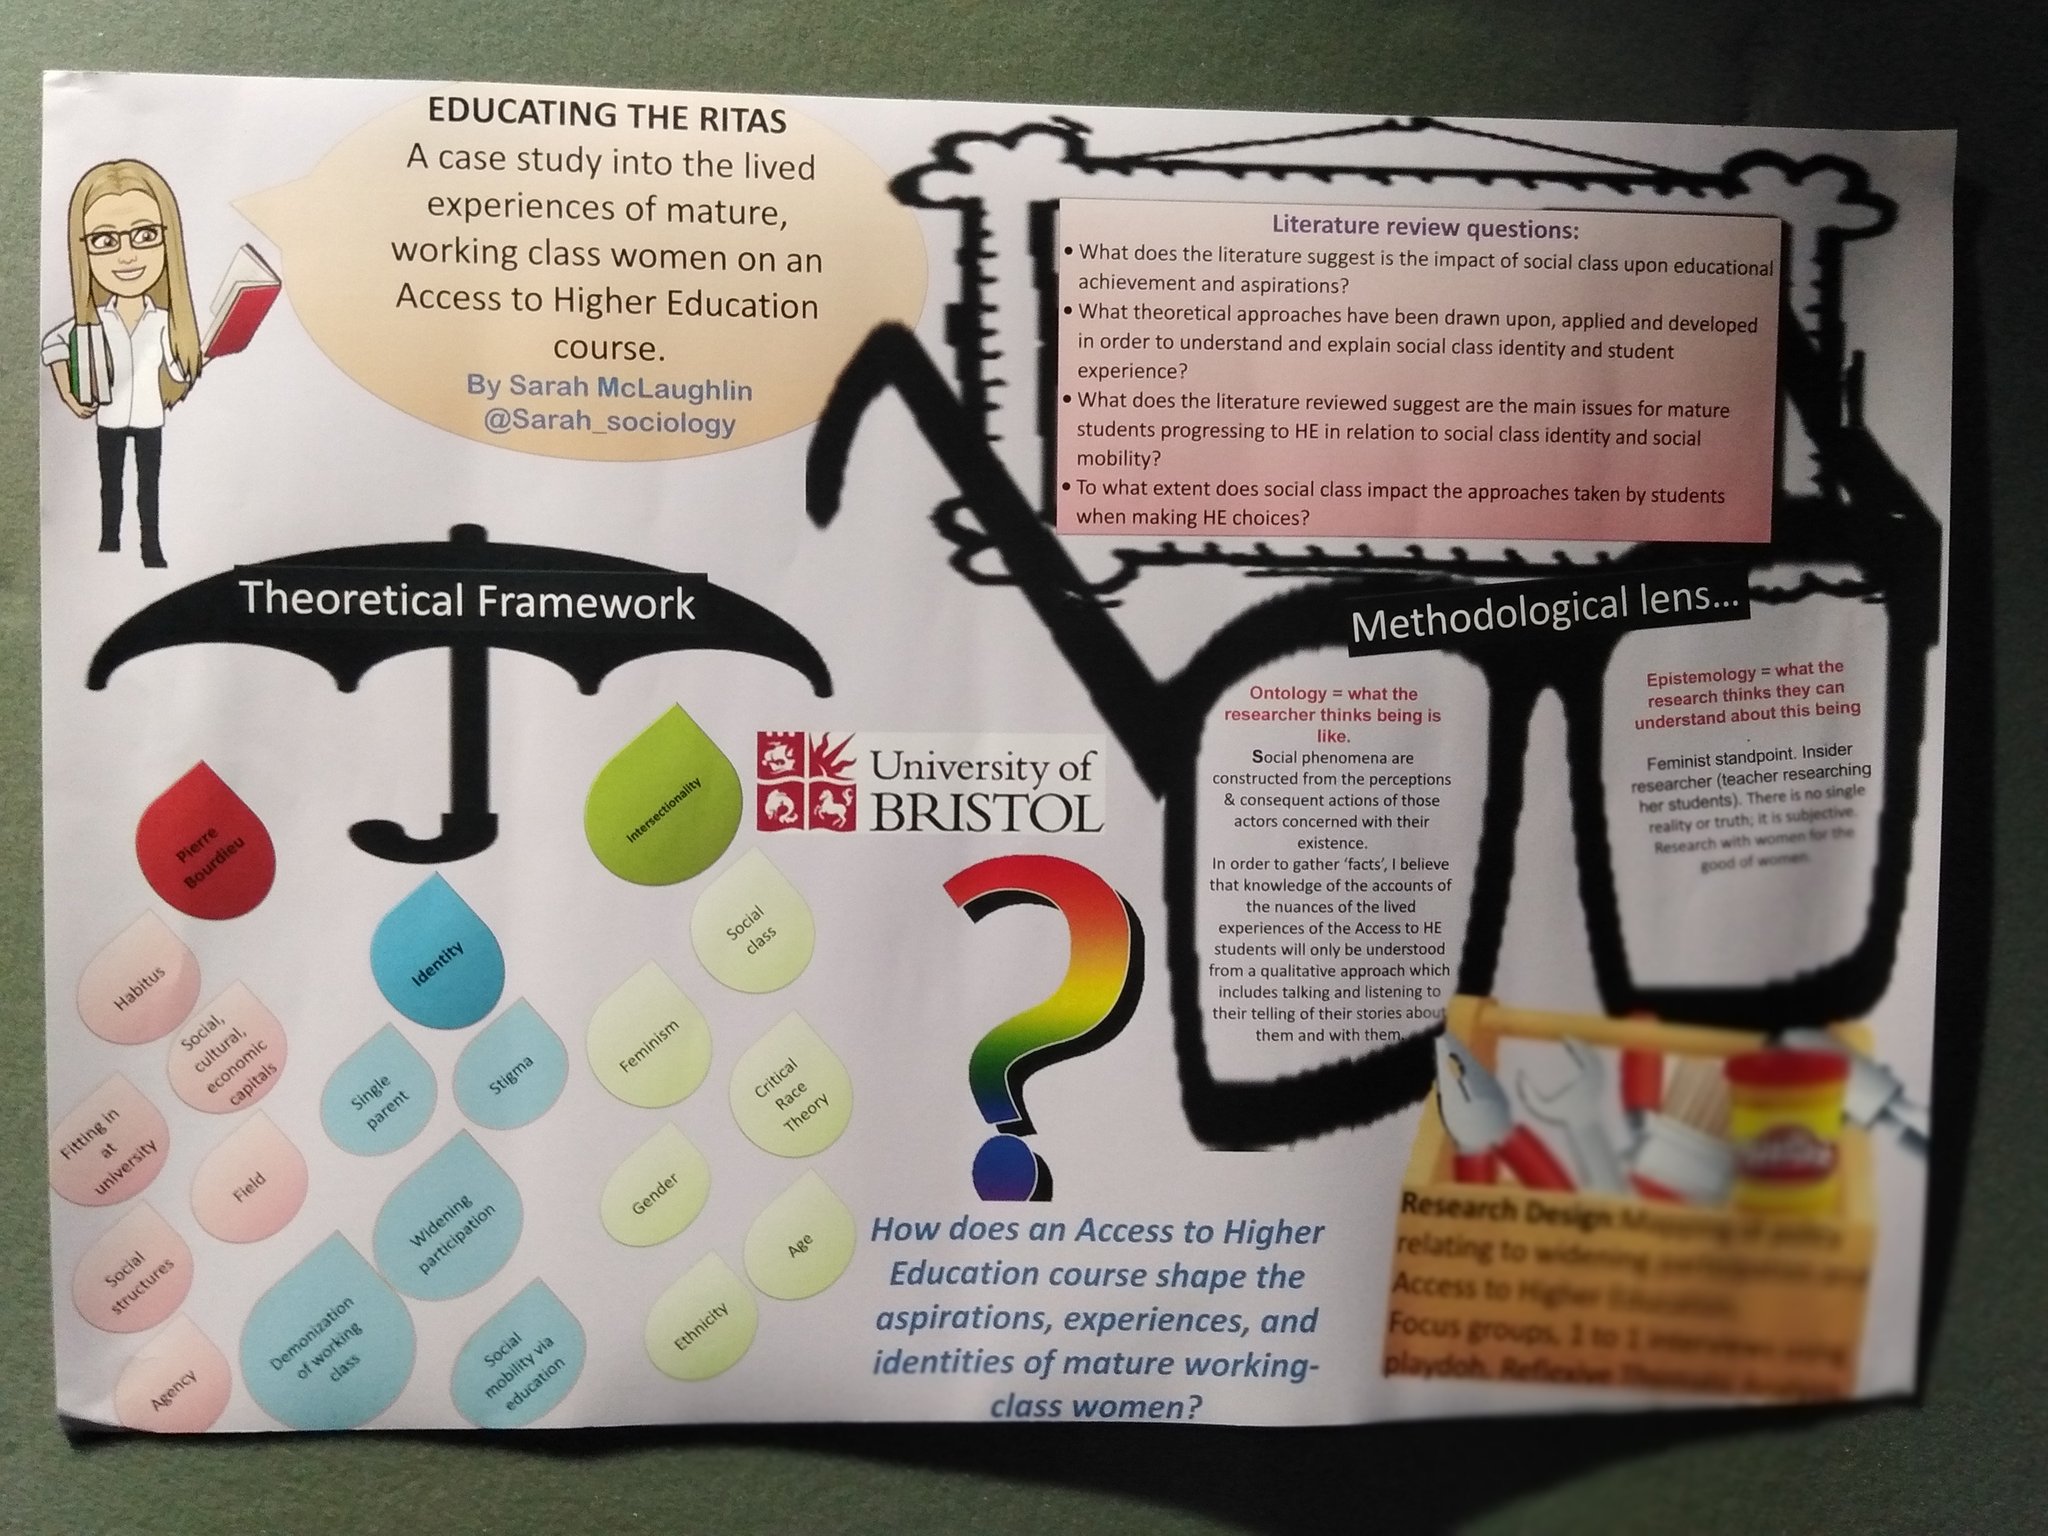 Winning Research poster ‘Educating the Rita’s’ – A case study into the lived experience of mature, working-class women on an Access to Higher Education course